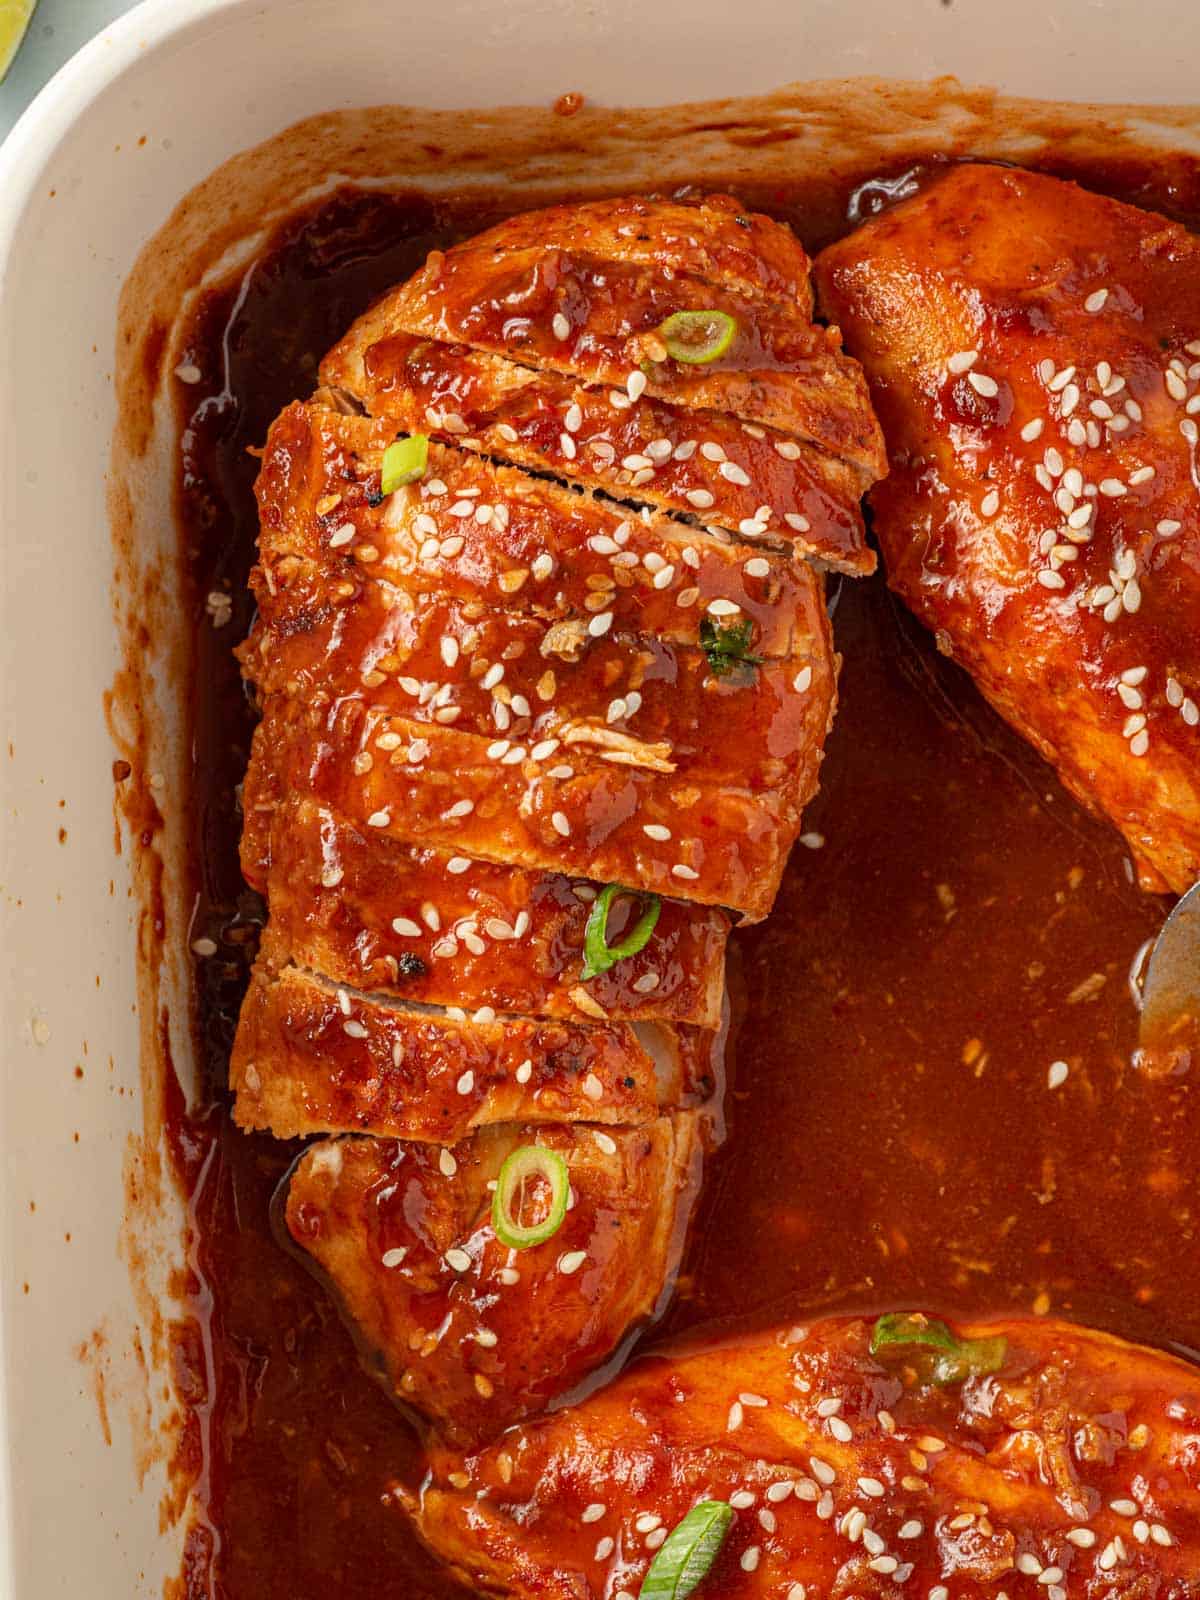 Spicy chicken breast recipe sliced in a pan for serving.